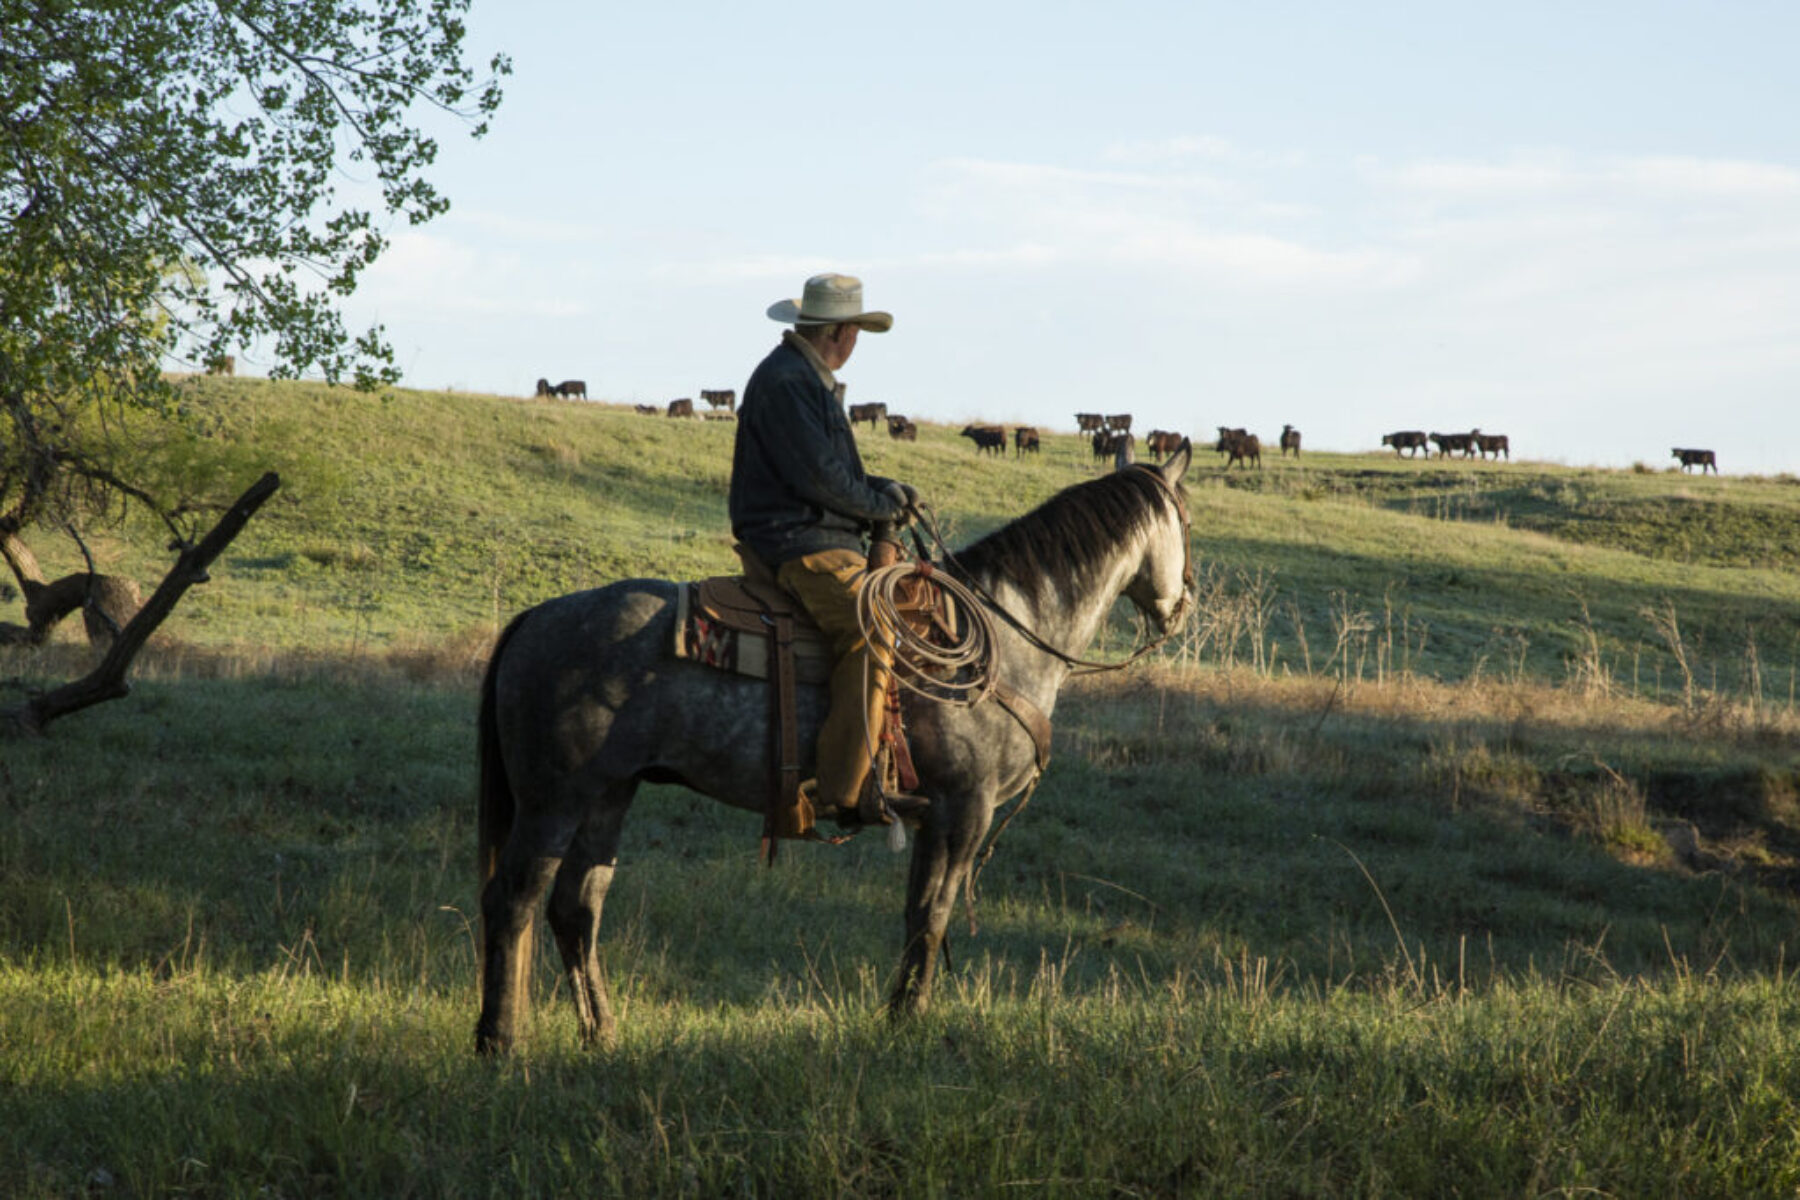 A man on a horse looking over his livestock